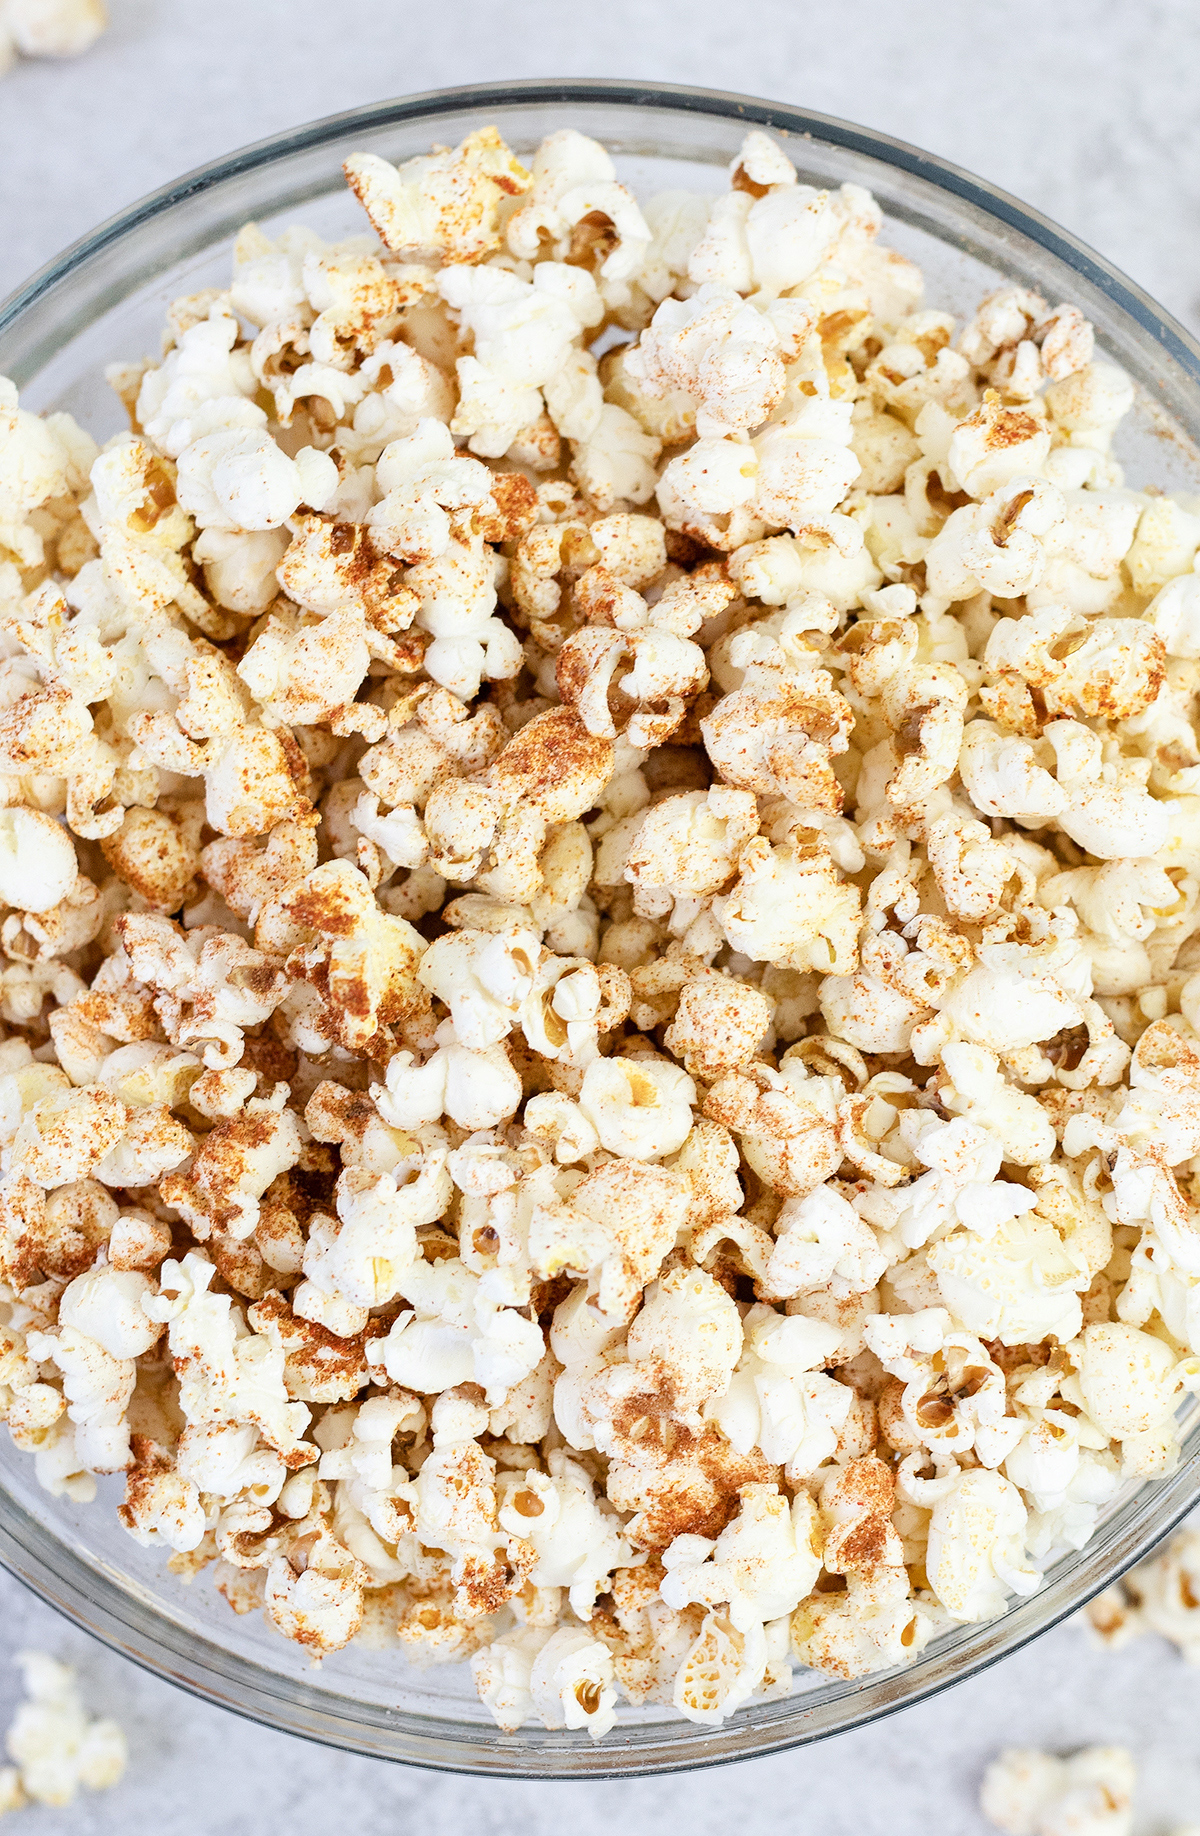 hot and spicy popcorn